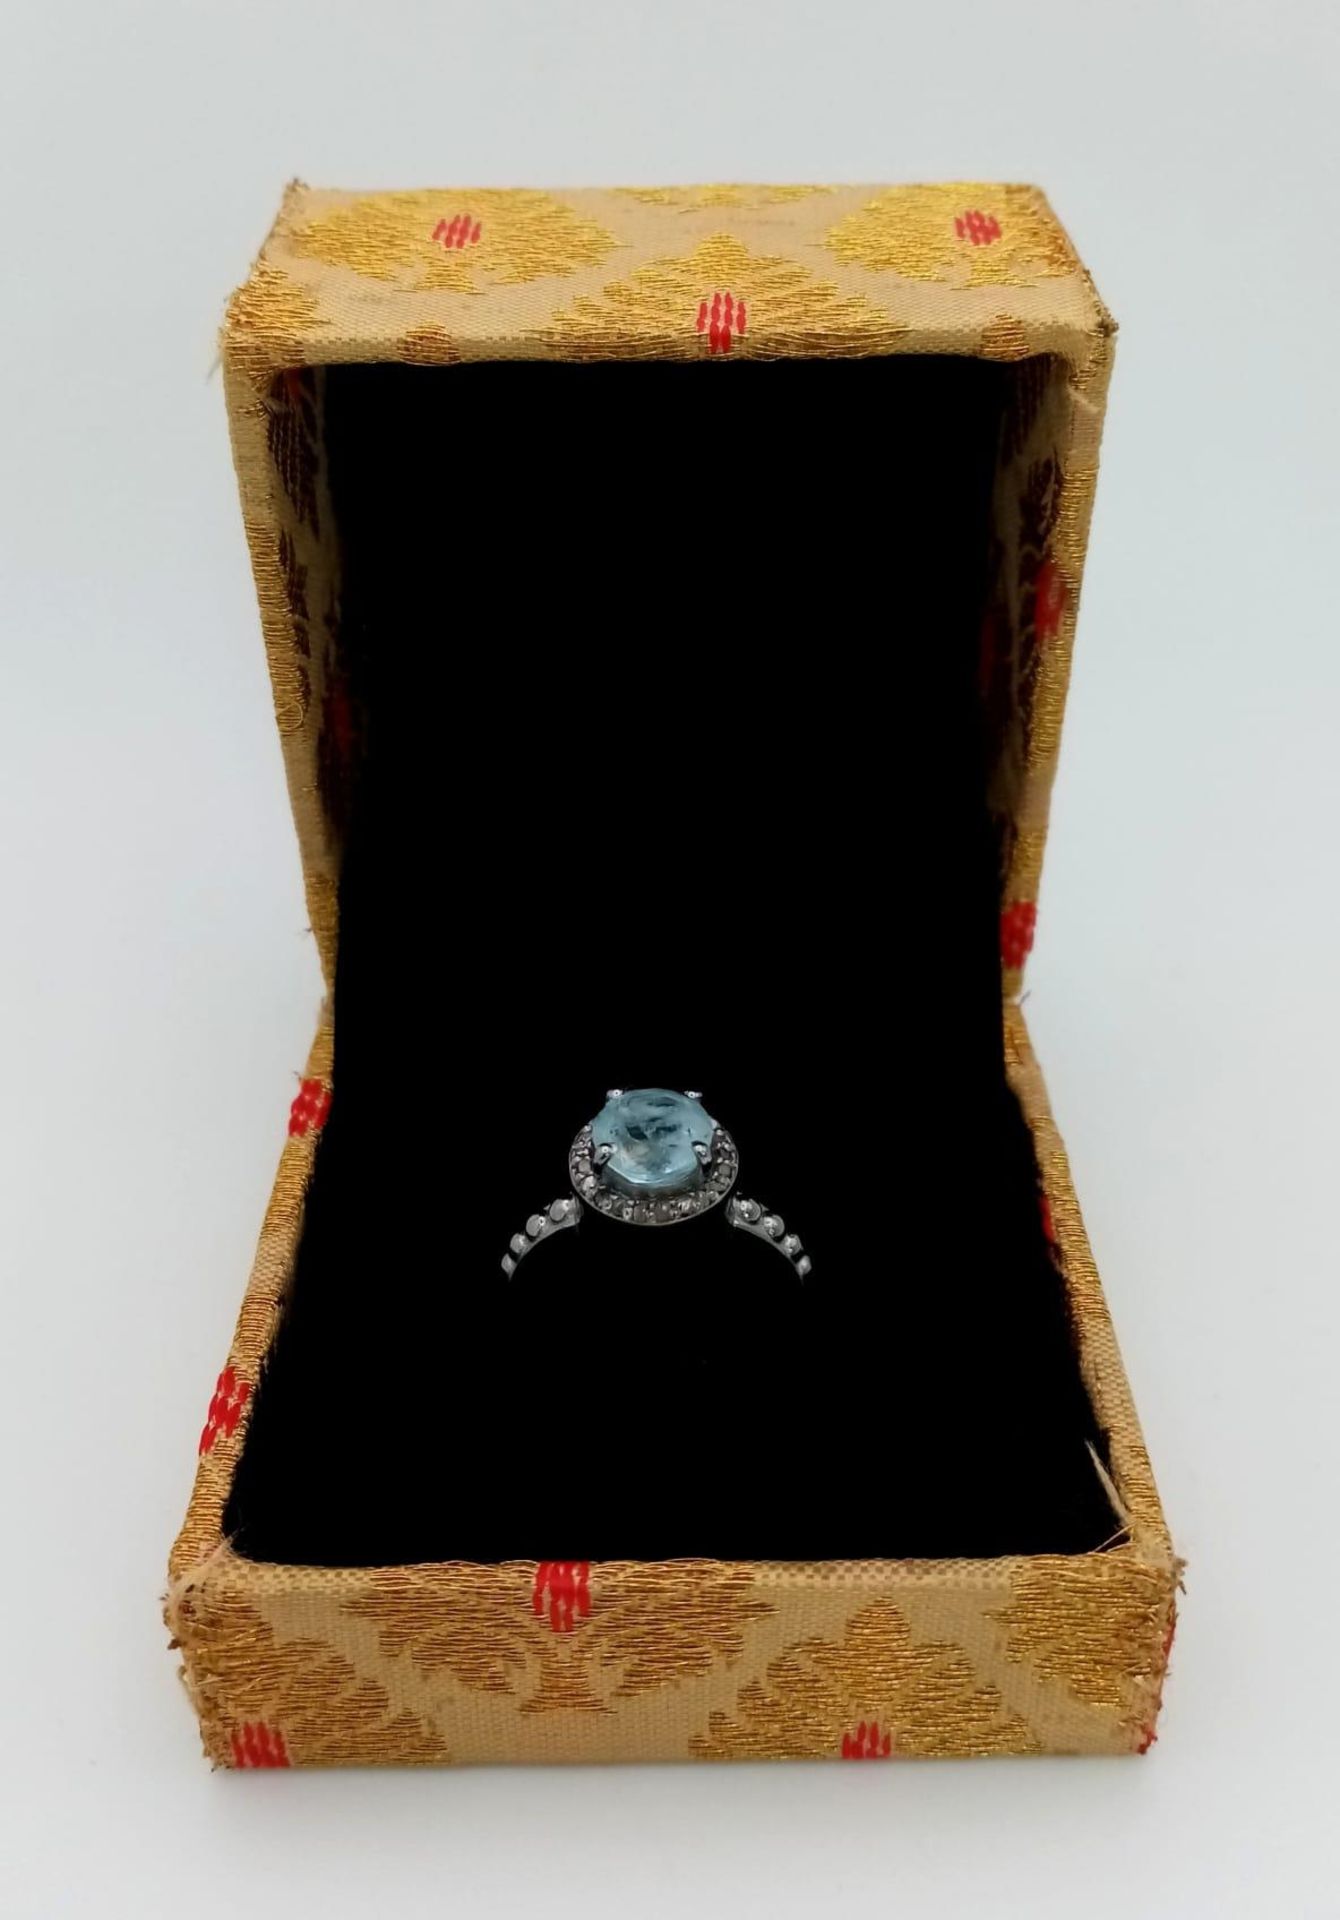 A Blue Topaz Ring with a Rose cut Diamond Halo. Set in 925 Sterling Silver. 1.50ct topaz. Diamond- - Image 5 of 5